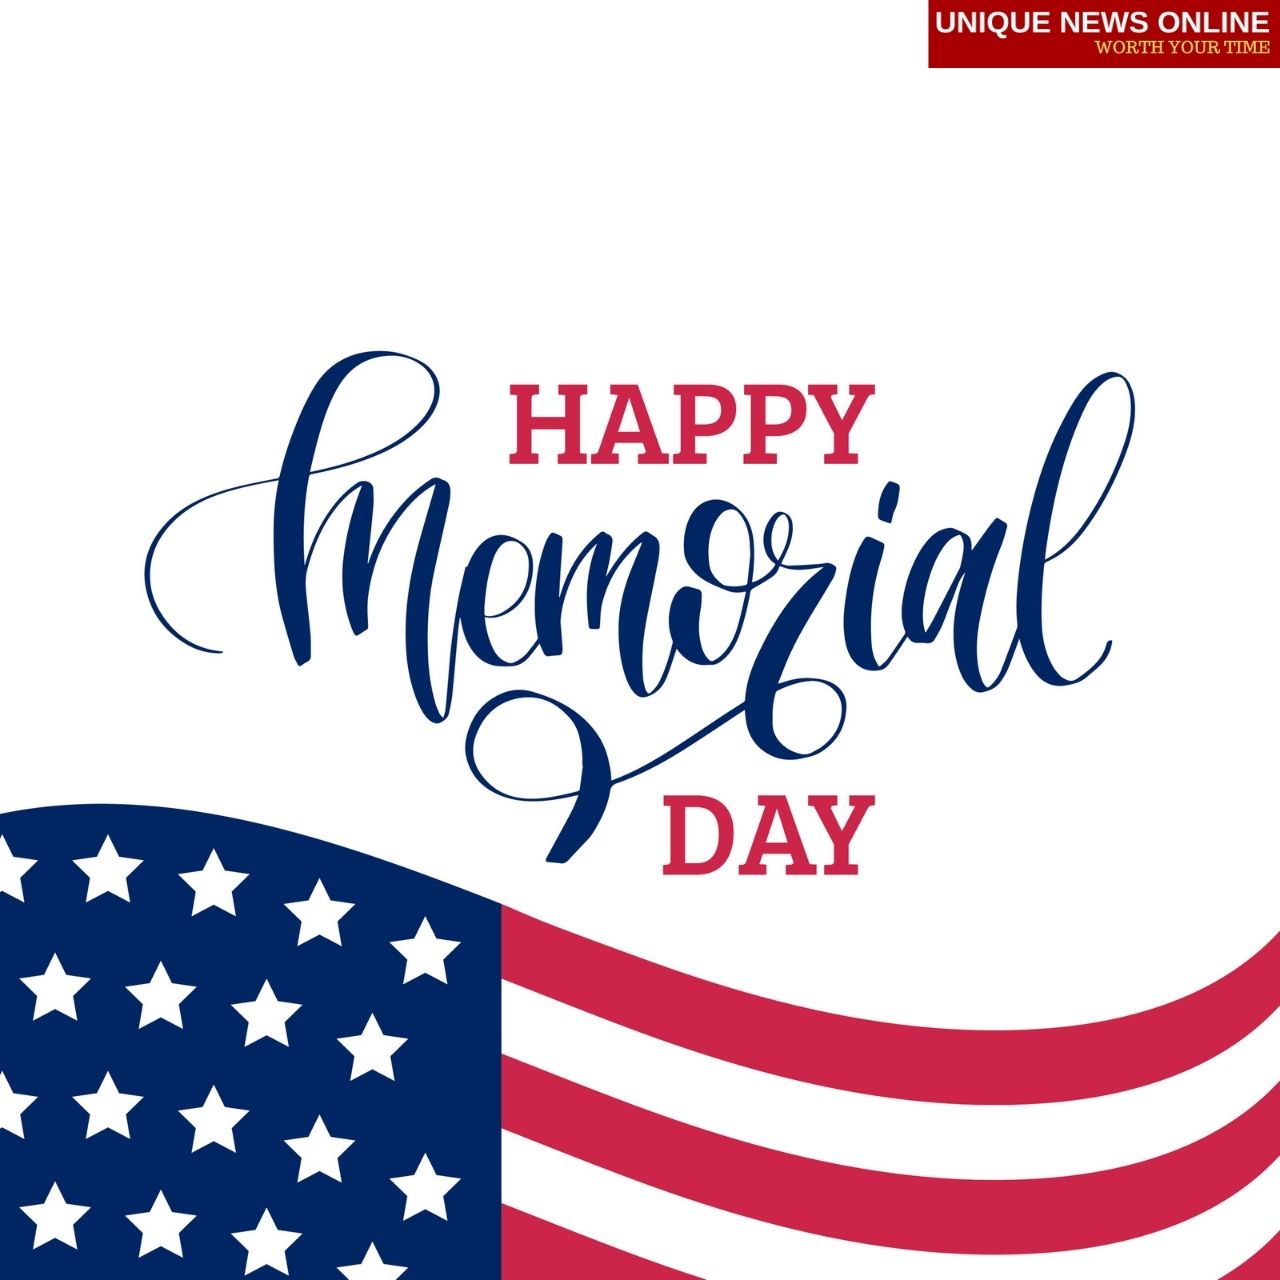 National Memorial Day 2021 Poster, Wishes, Images, Greetings, Quotes